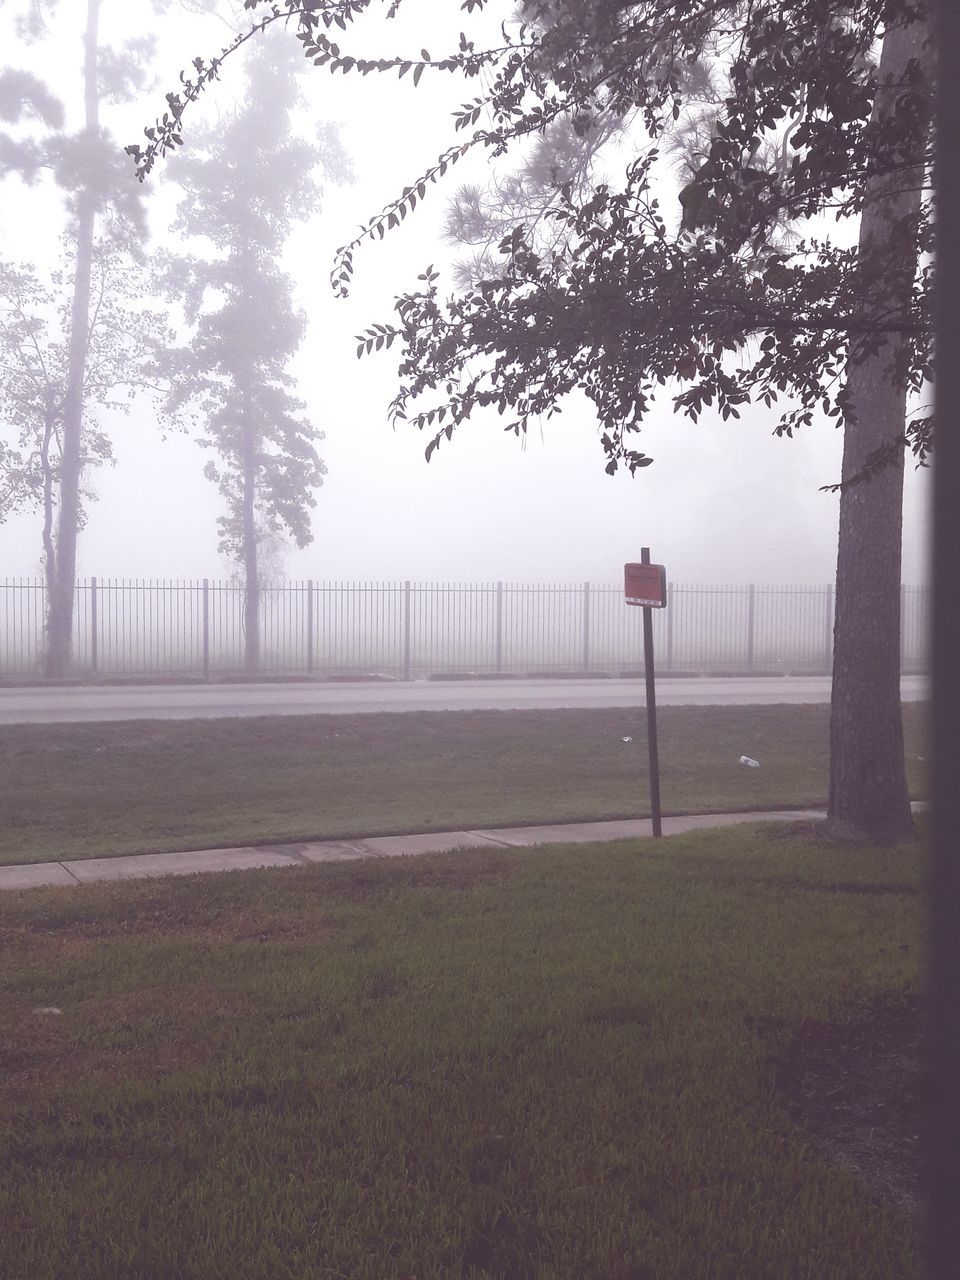 tree, grass, day, fog, no people, outdoors, tranquility, nature, sky, landscape, beauty in nature, playing field, soccer field, green - golf course